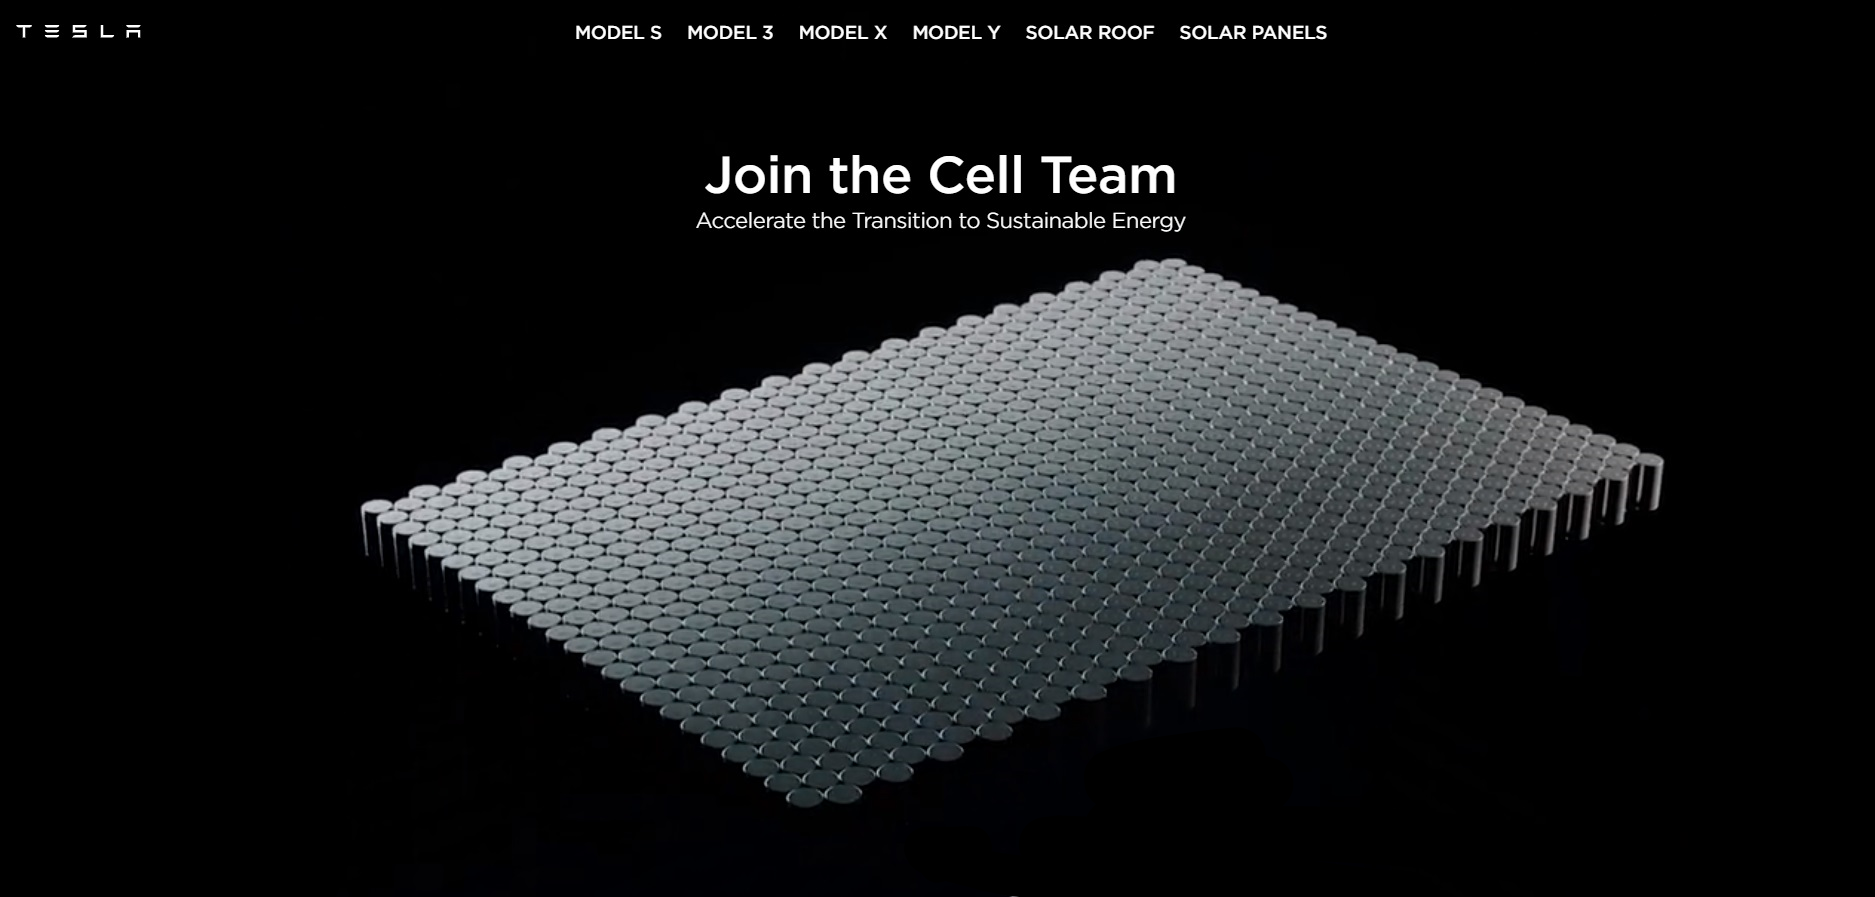 Tesla 4680 Battery Cell Production Team Launches New Recruitment Campaign ‘Tera is the New Giga’